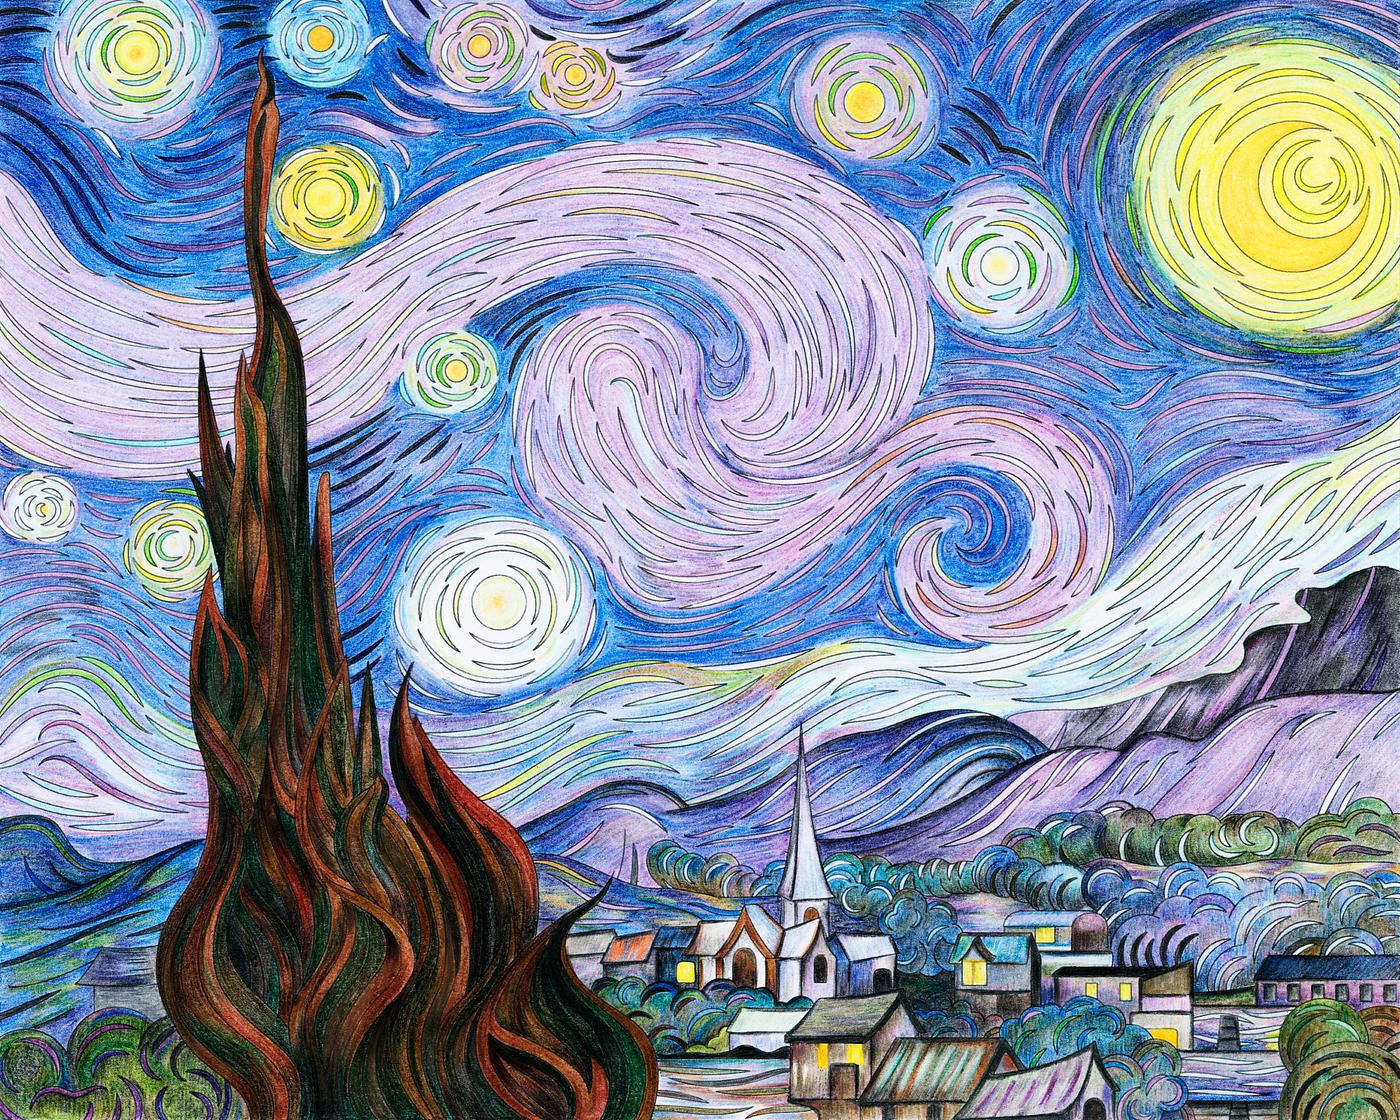 the-starry-night-1889-by-vincent-van-gogh-adult-coloring-page-free